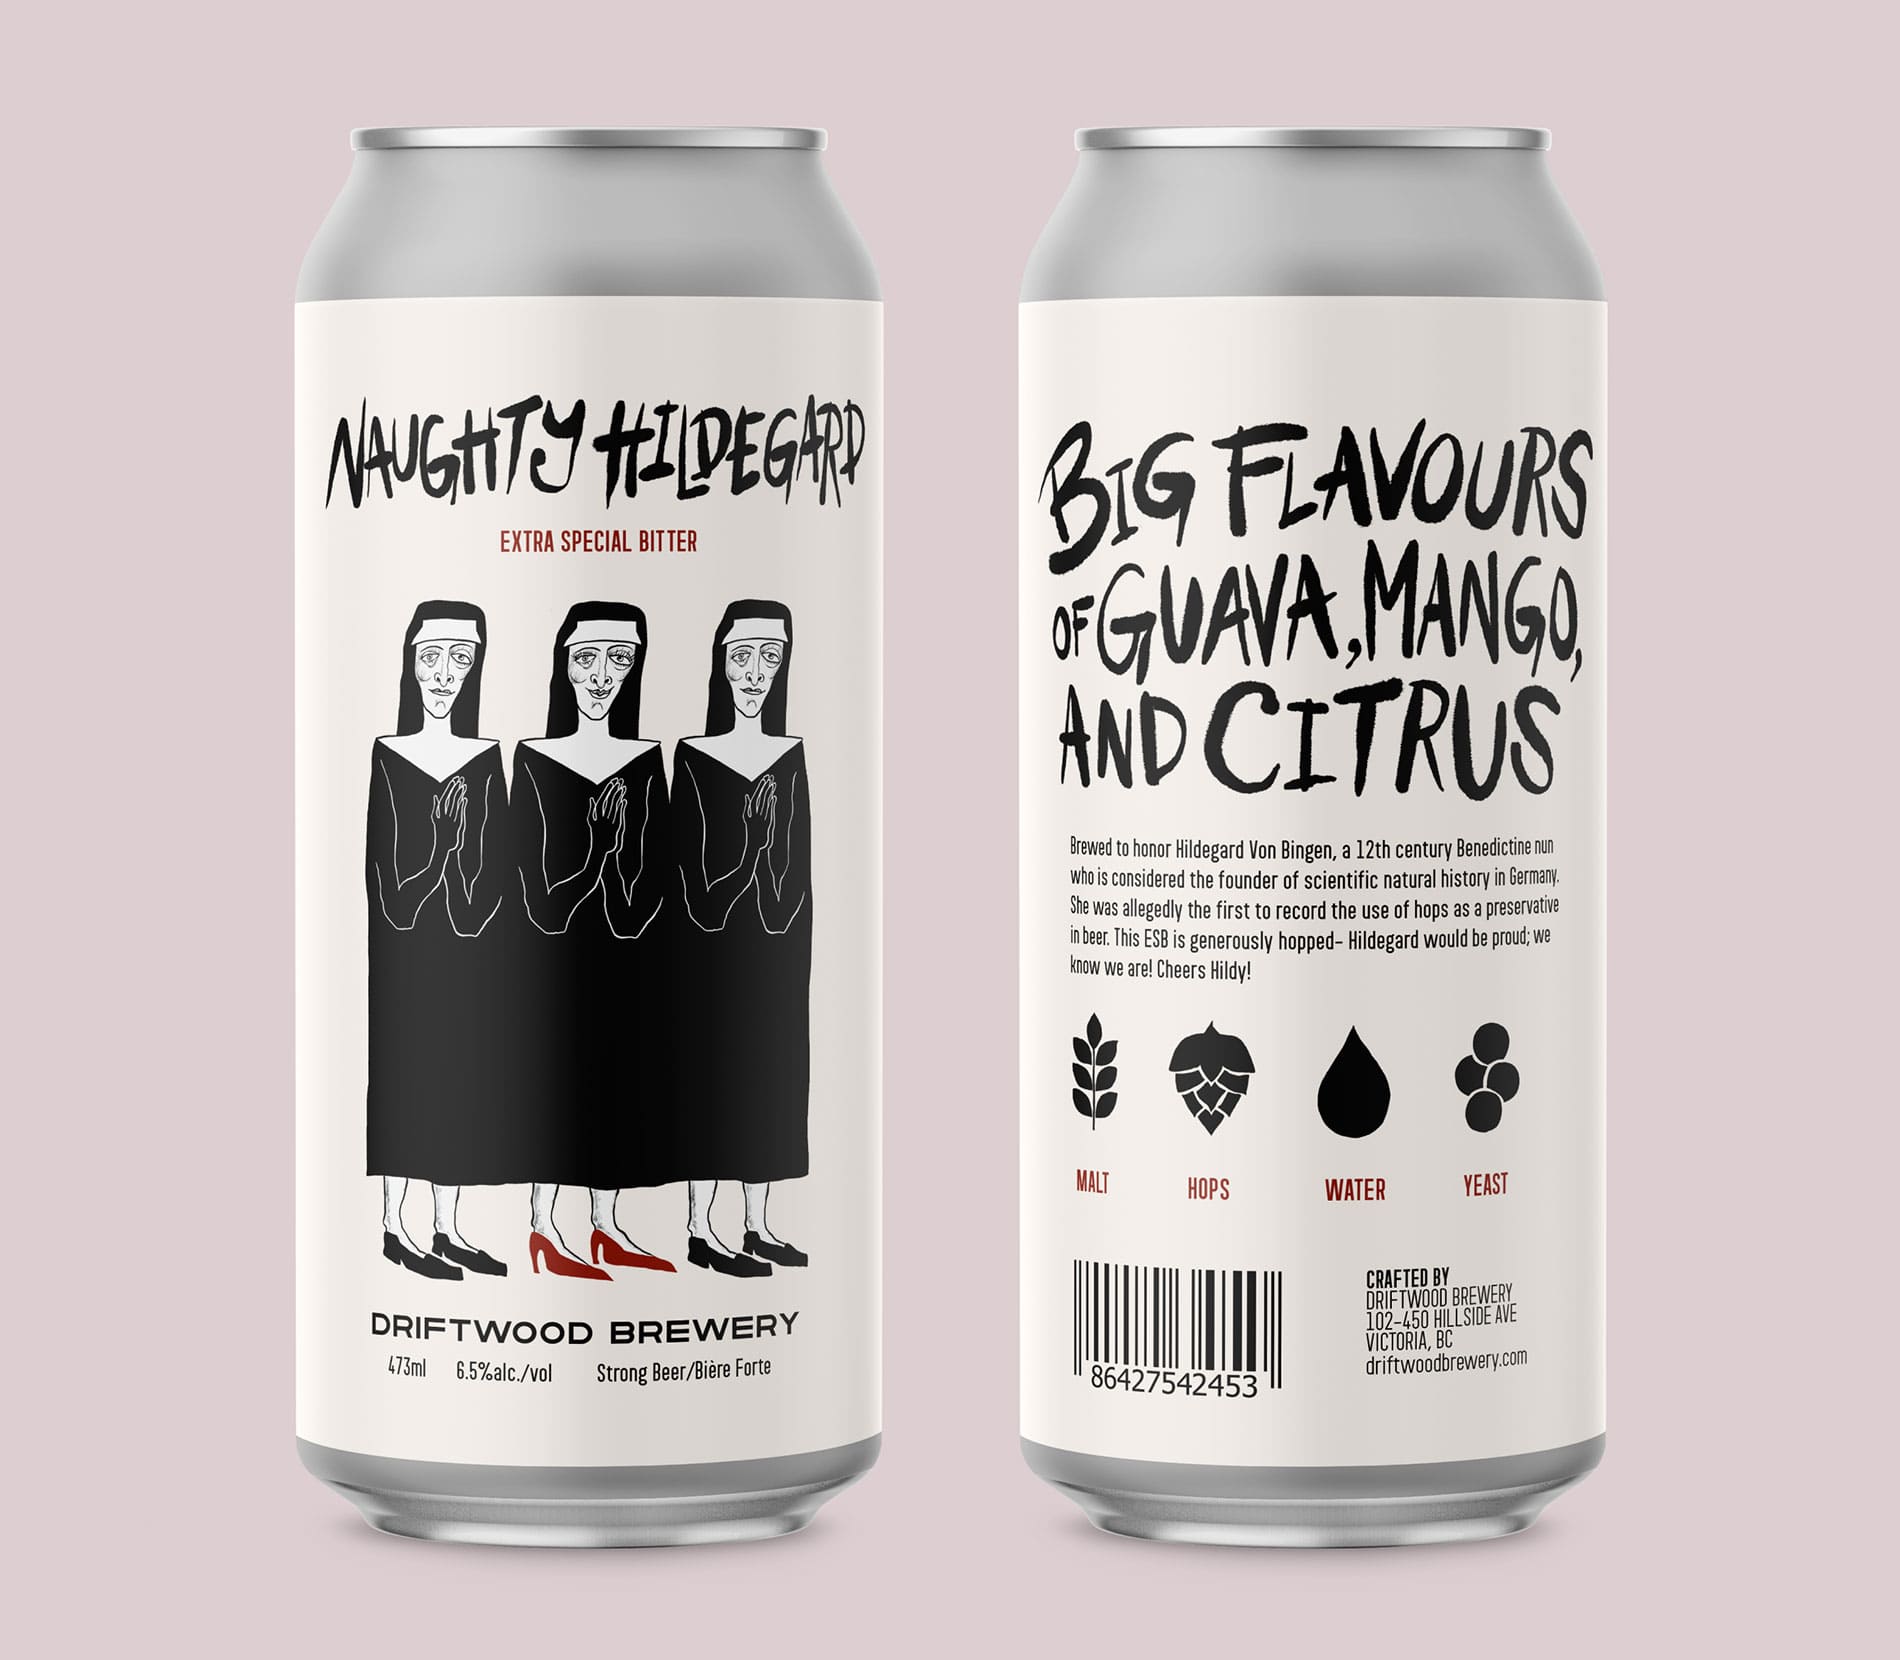 Naughty Hildegard beer can design with an illustration of 3 nuns beside each other, the nun in the middle is wearing red heels while the others are in black shoes